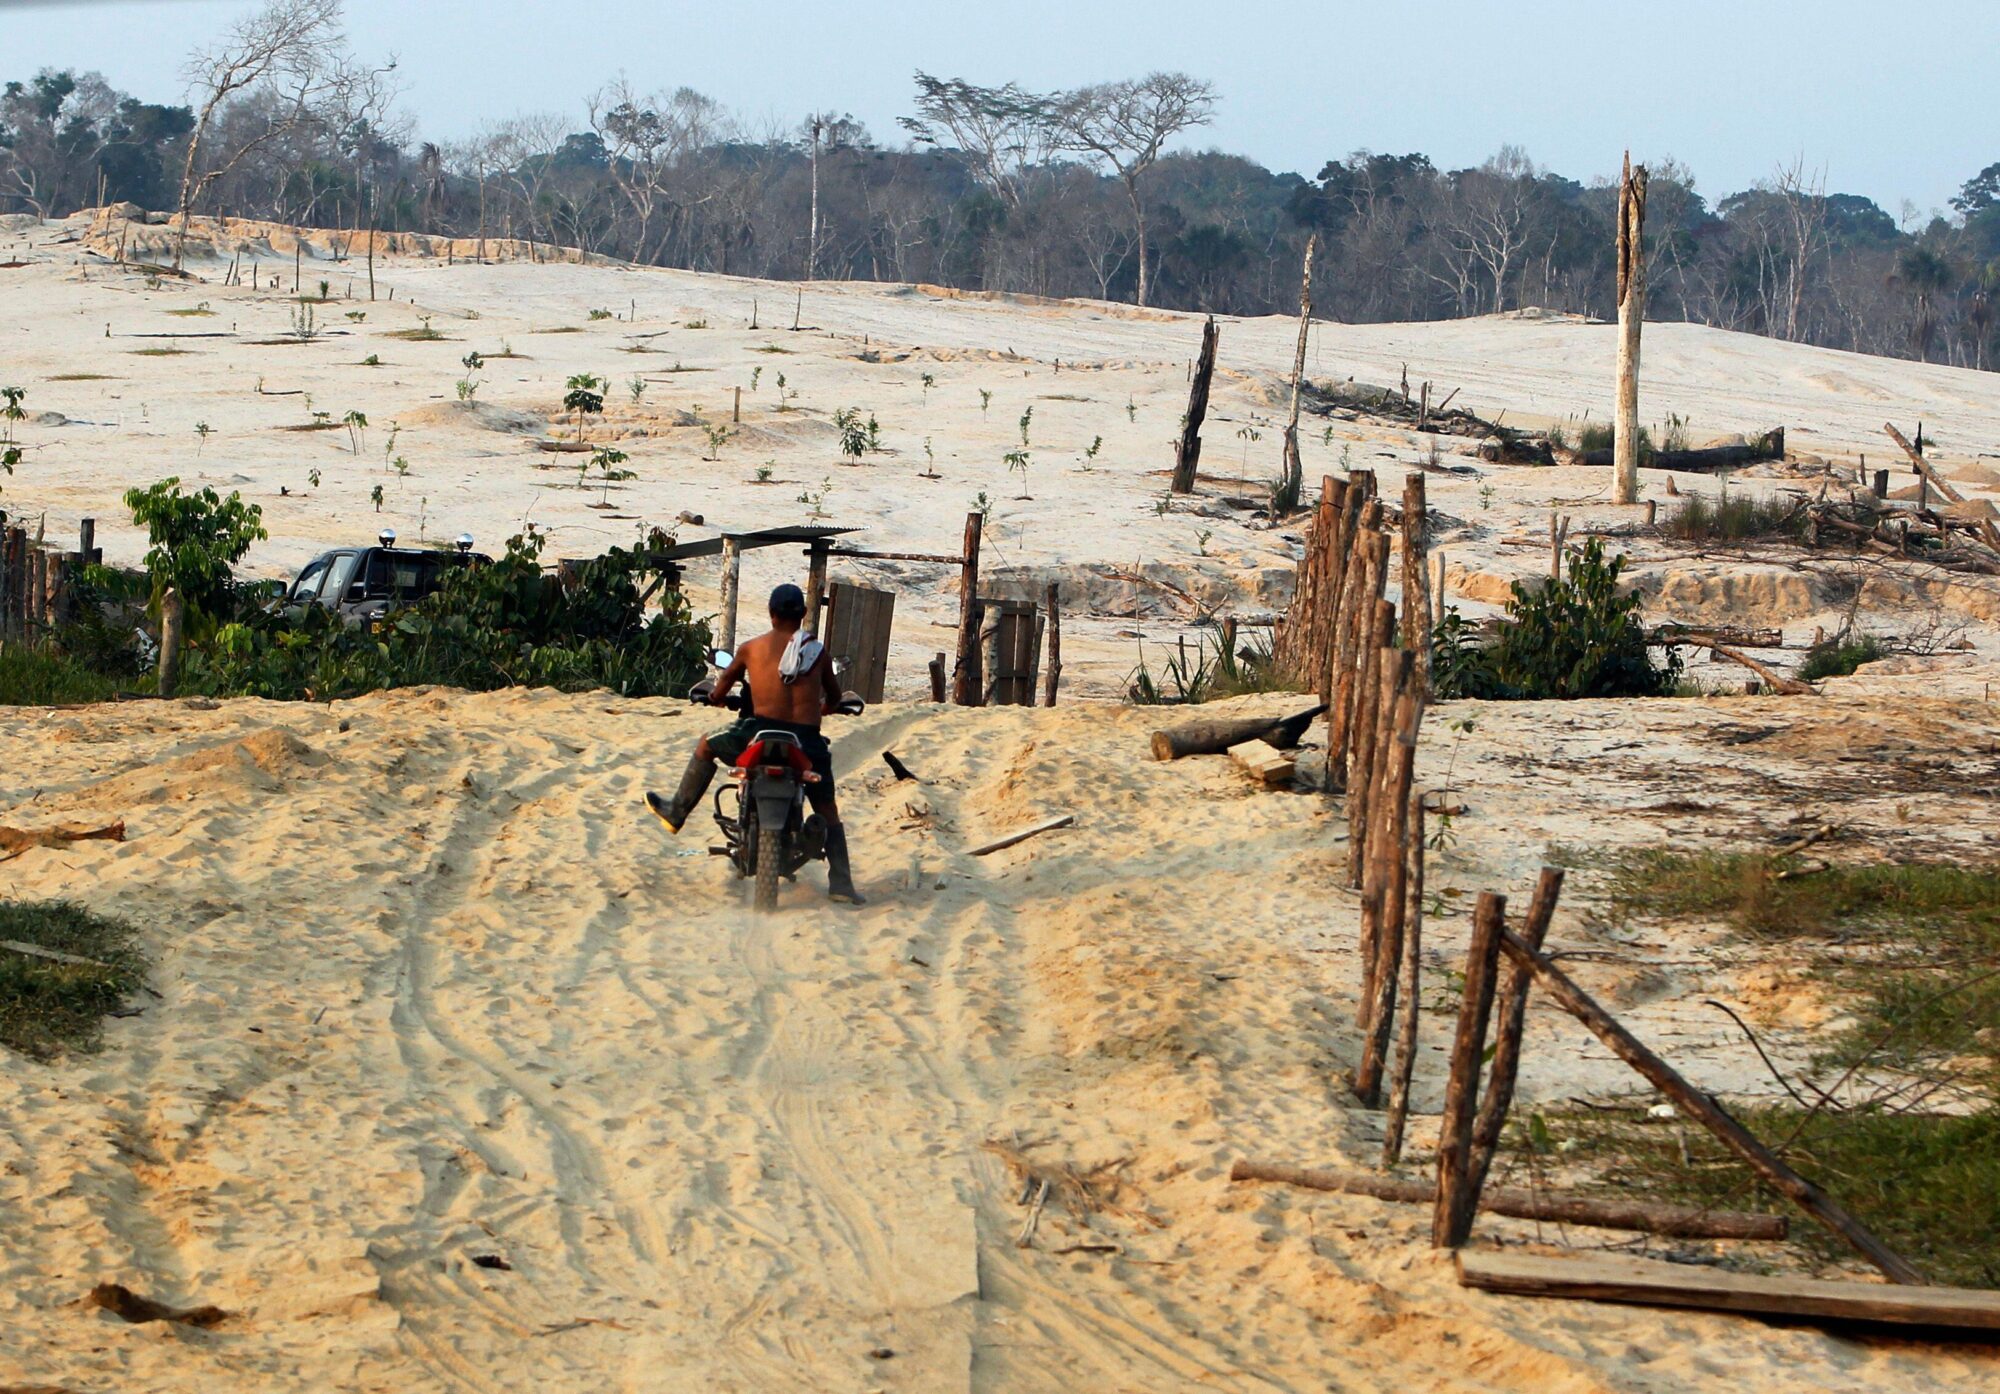 <p>A motorcyclist rides in an area deforested for informal gold mining, along a section of the Interoceanic Highway linking Peru and Brazil in the Amazon region of Madre de Dios. The road was promised to improve transit, trade and tourism but, a decade on, its record is chequered, and it has brought much change to the Peruvian Amazon. (Image: Mariana Bazo / Alamy)</p>